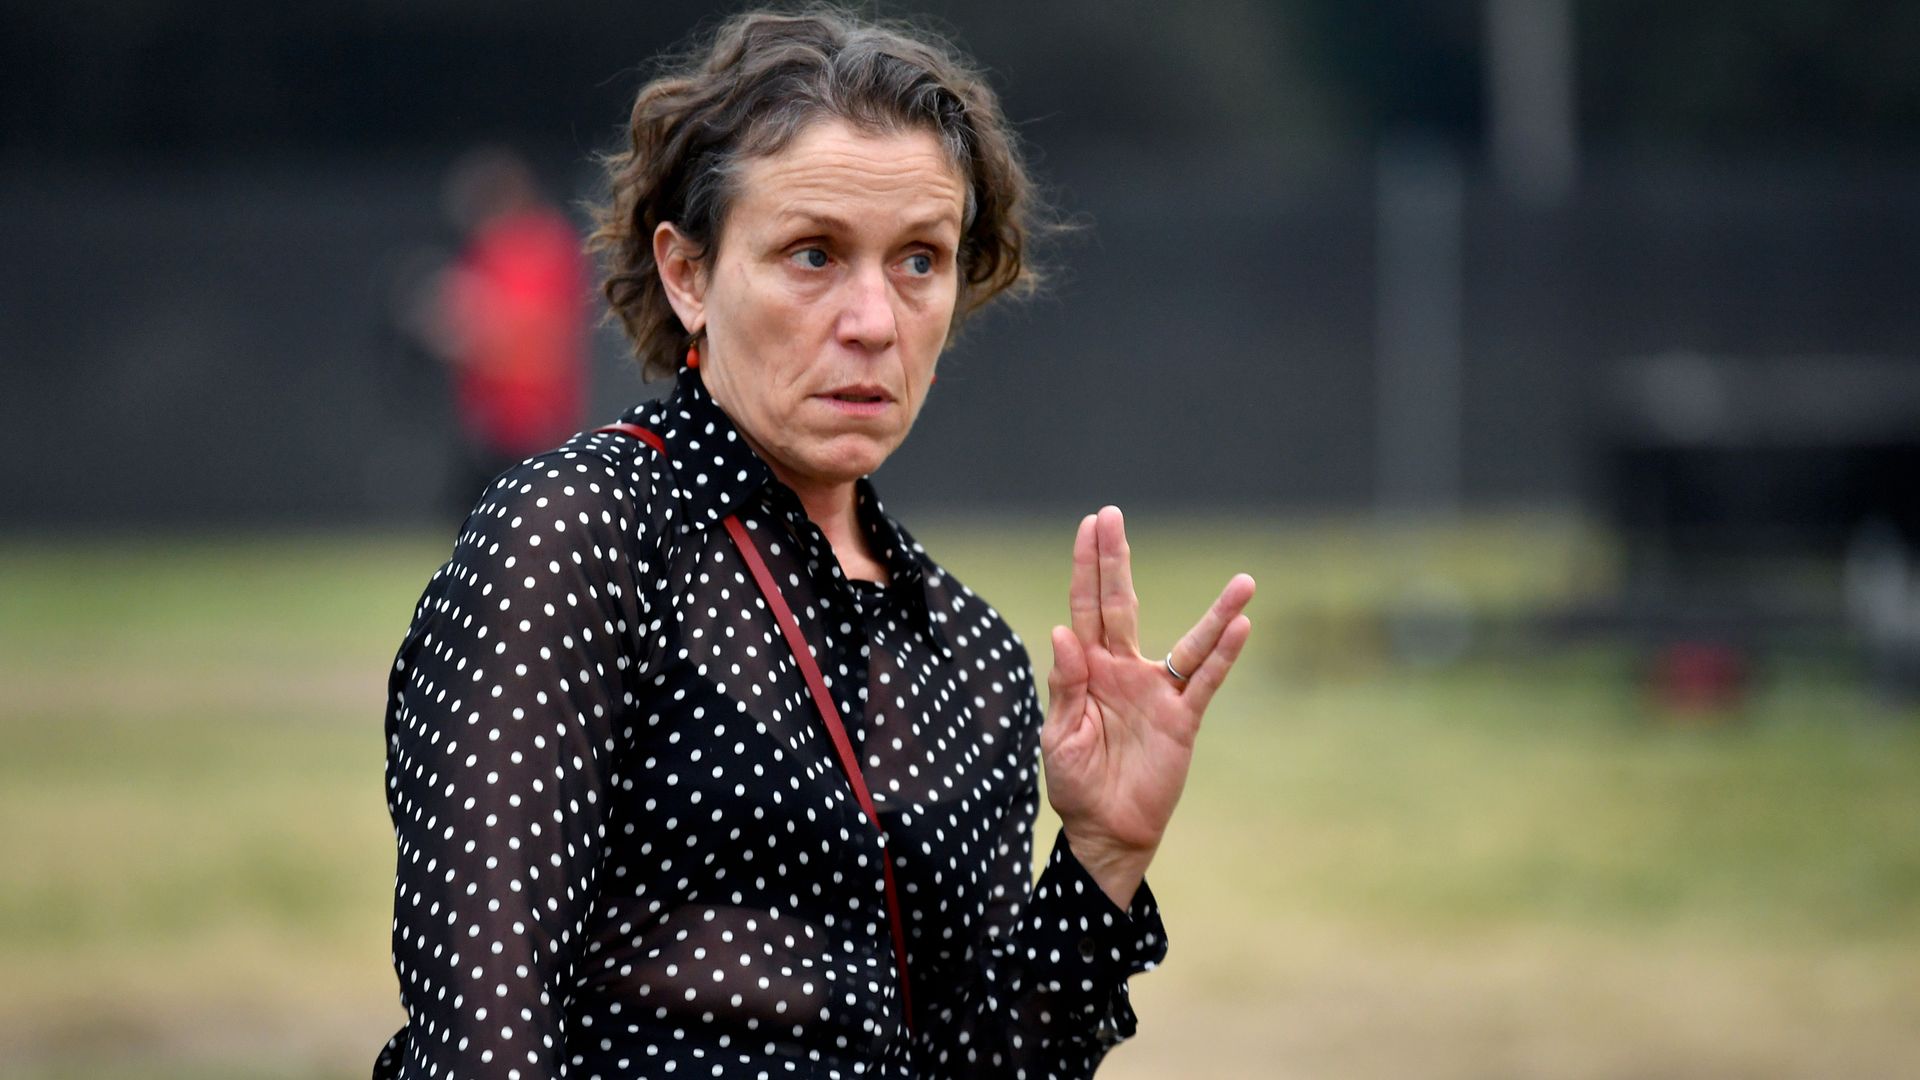 Photo of "Nomadland" star Frances MacDormand at the film's drive-in screening at the Telluride Film Festival